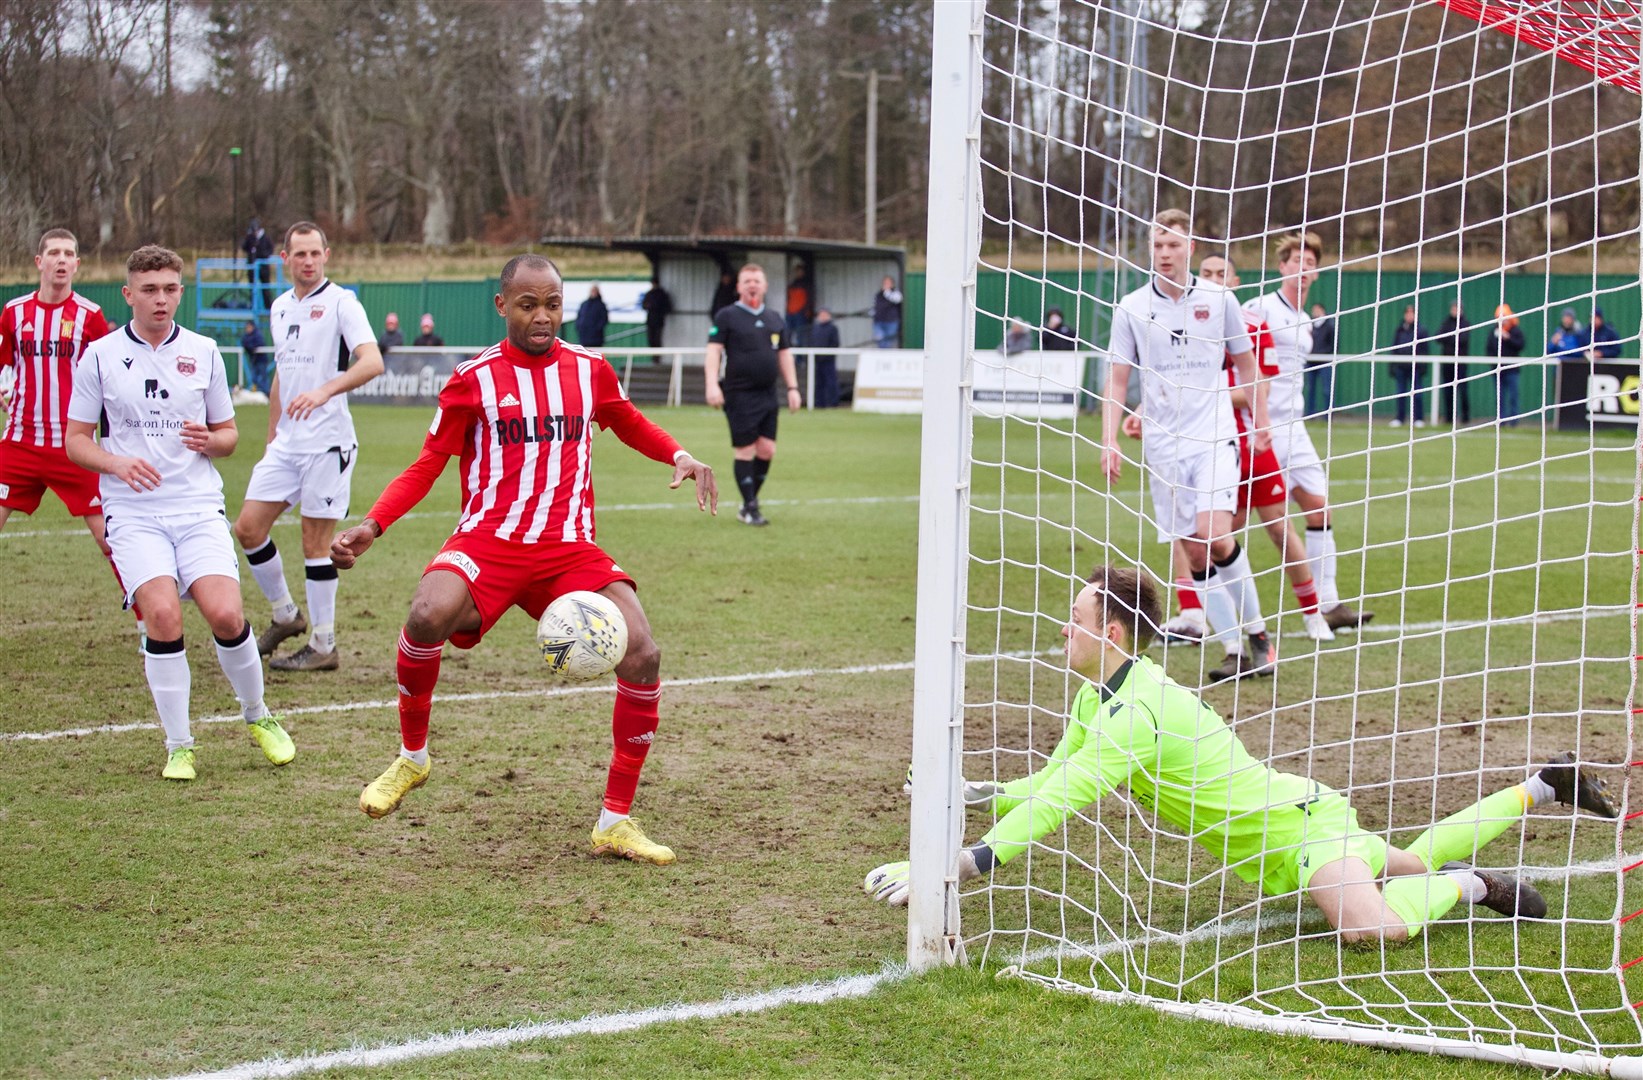 Julian Wade's switch from Brechin to Formartine brought 27 goals to the Pitmedden club. Picture: Phil Harman